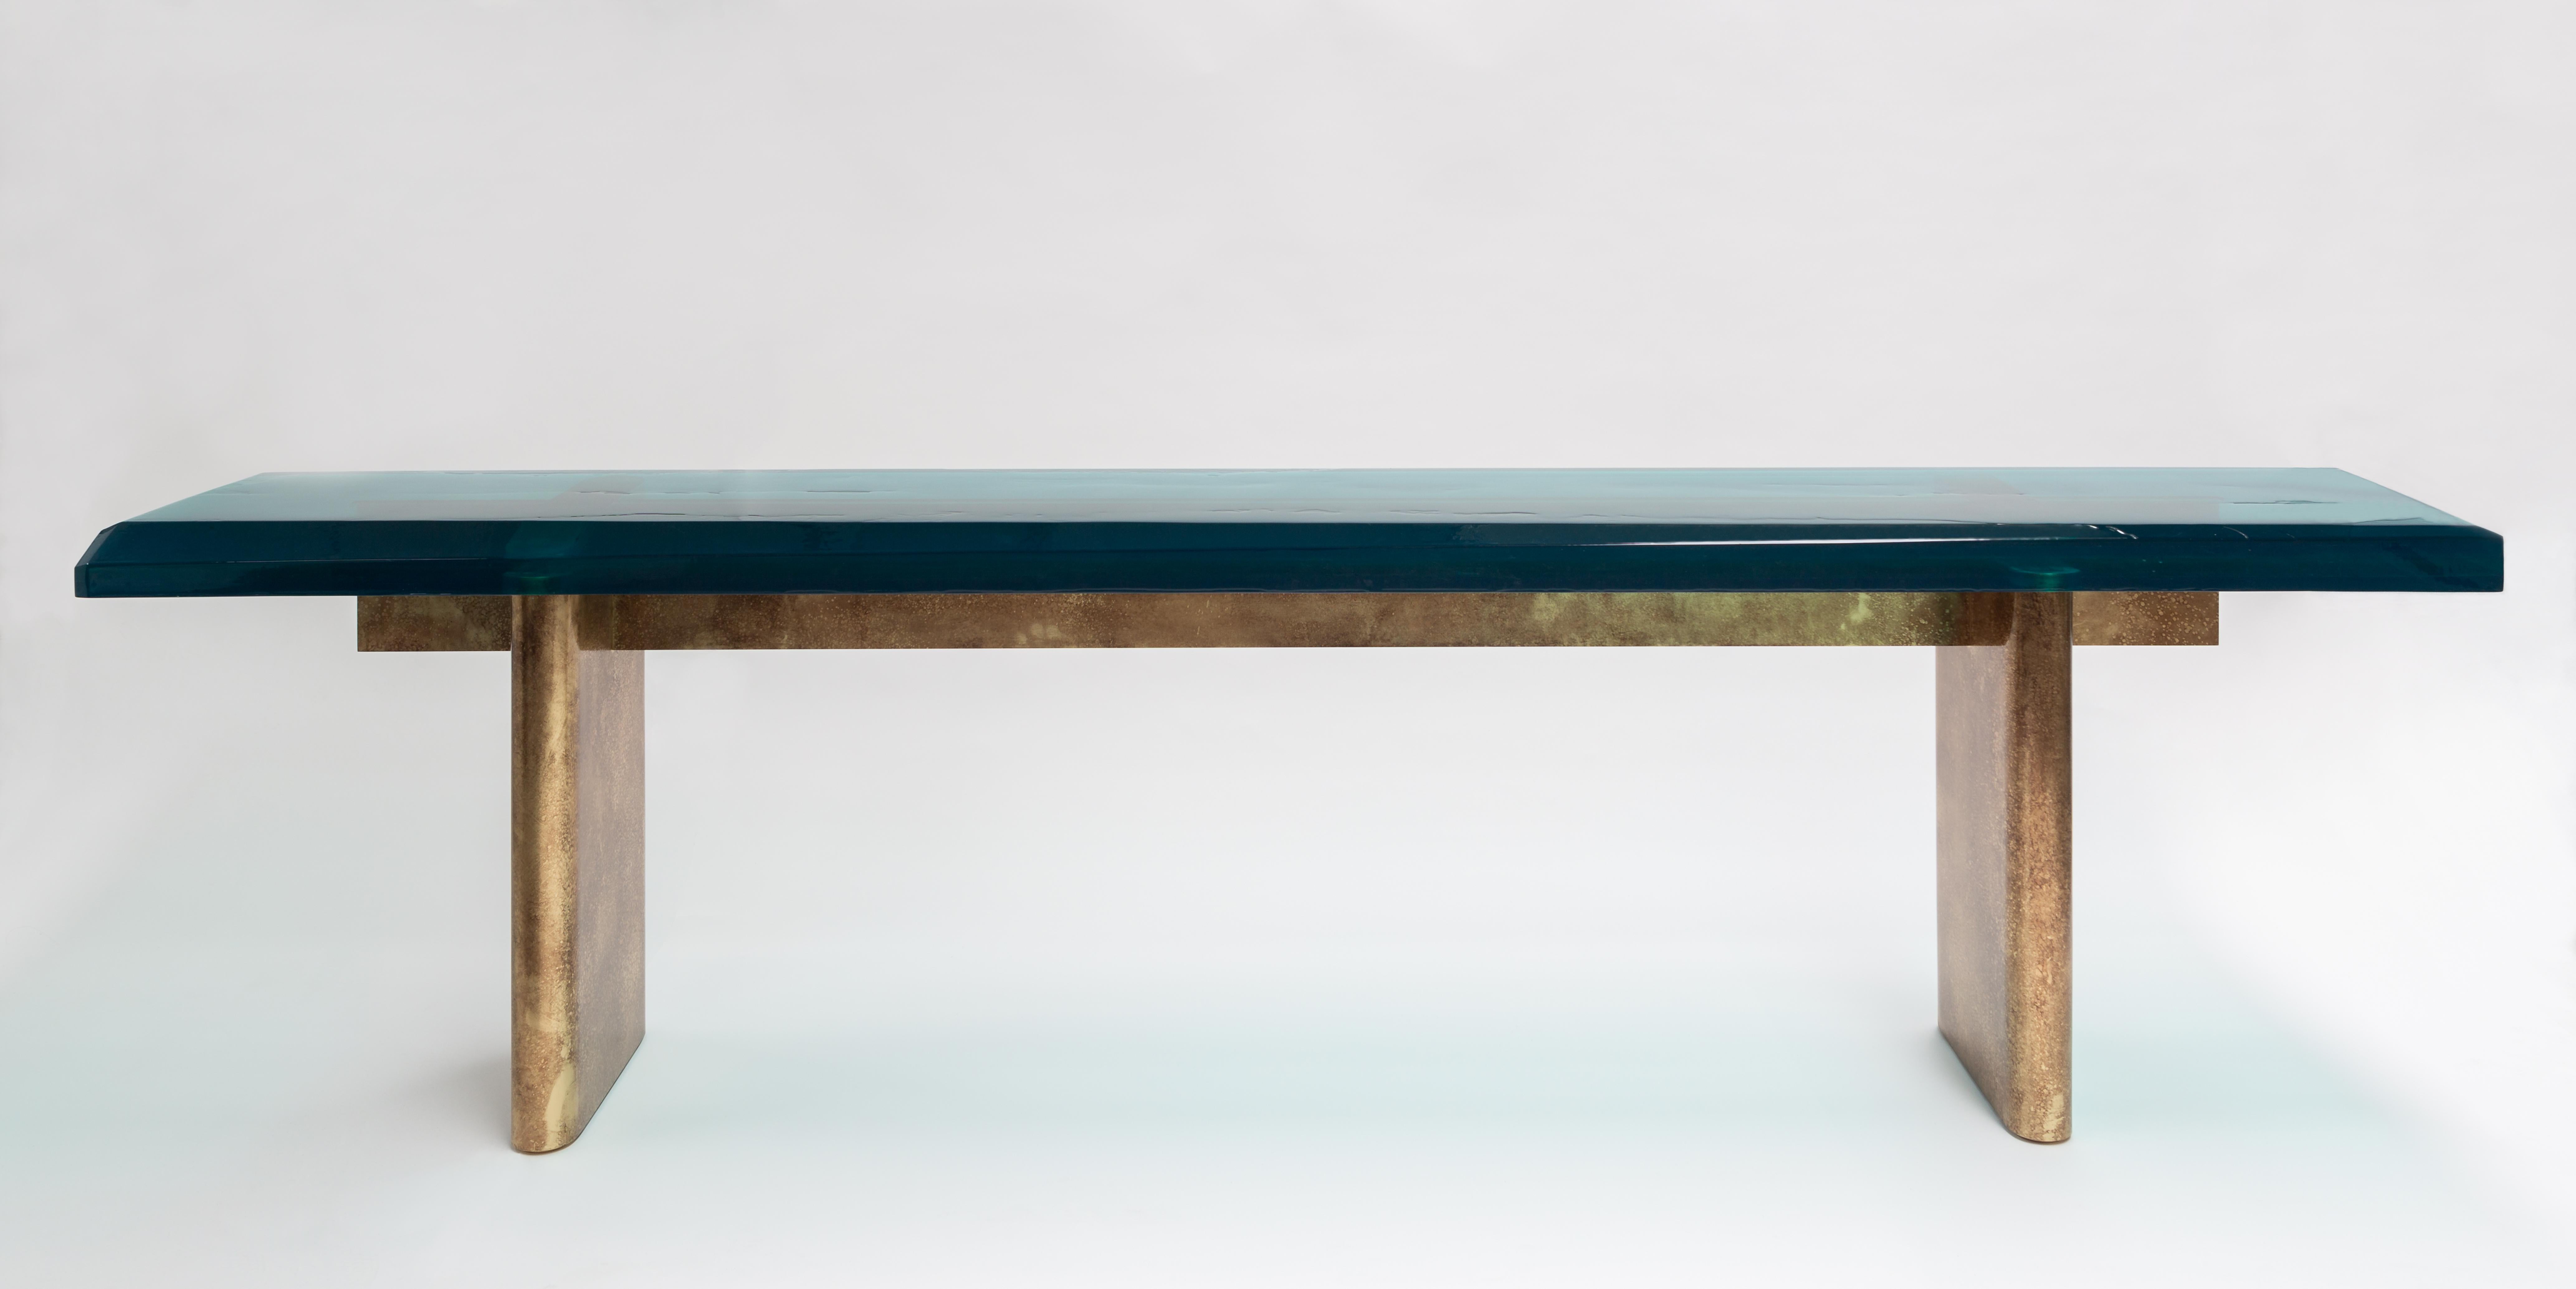 Transparency Matters collection by Draga&Aurel:
The desk features two solid brass bases and a resin cast top, designed to achieve a liquid-look surface; it is finished with brush strokes of more textured resin, applied with a fluid movement, just